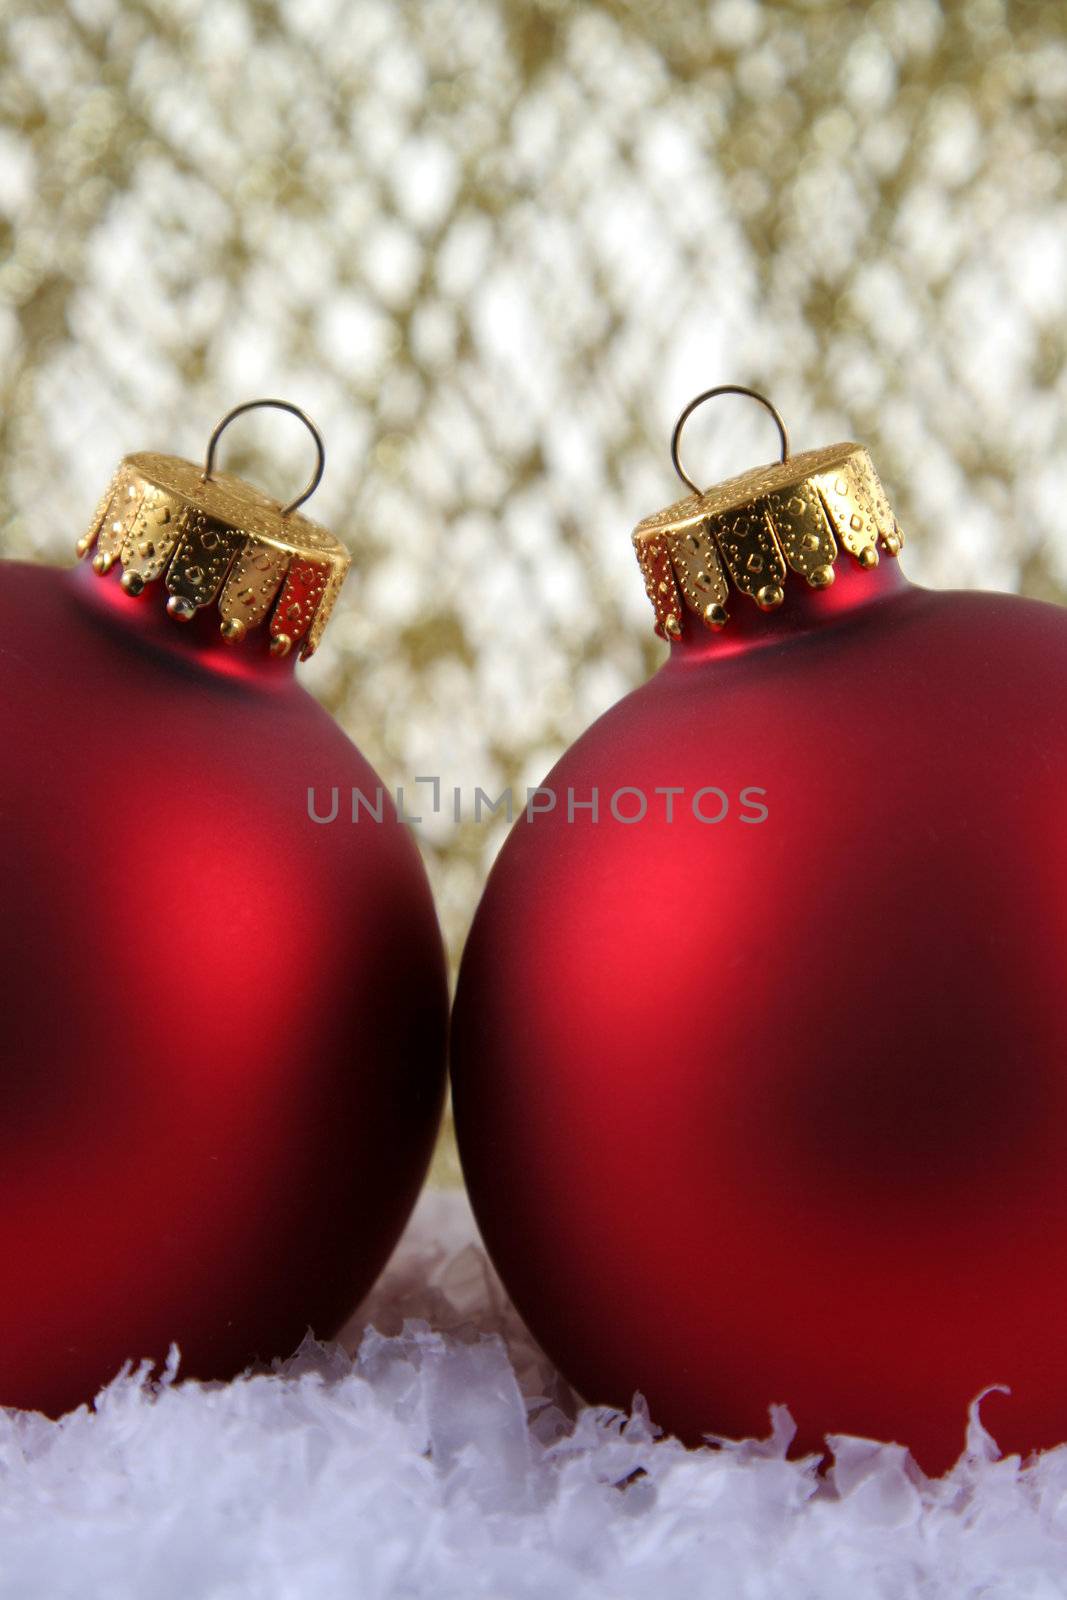 Two red Christmas bauble backed by gold glittery strings.
